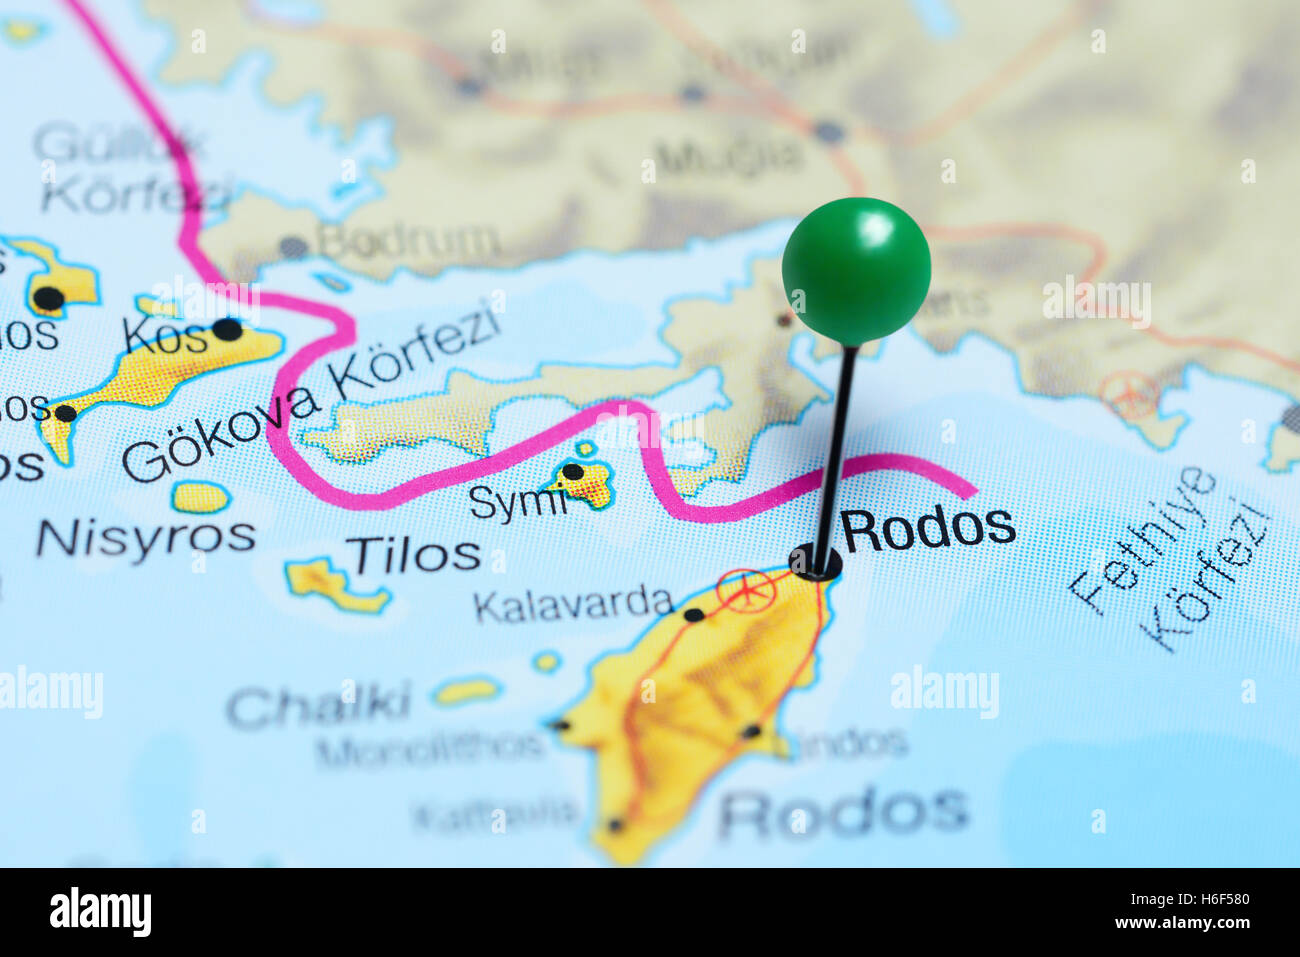 Rodos pinned on a map of Greece Stock Photo